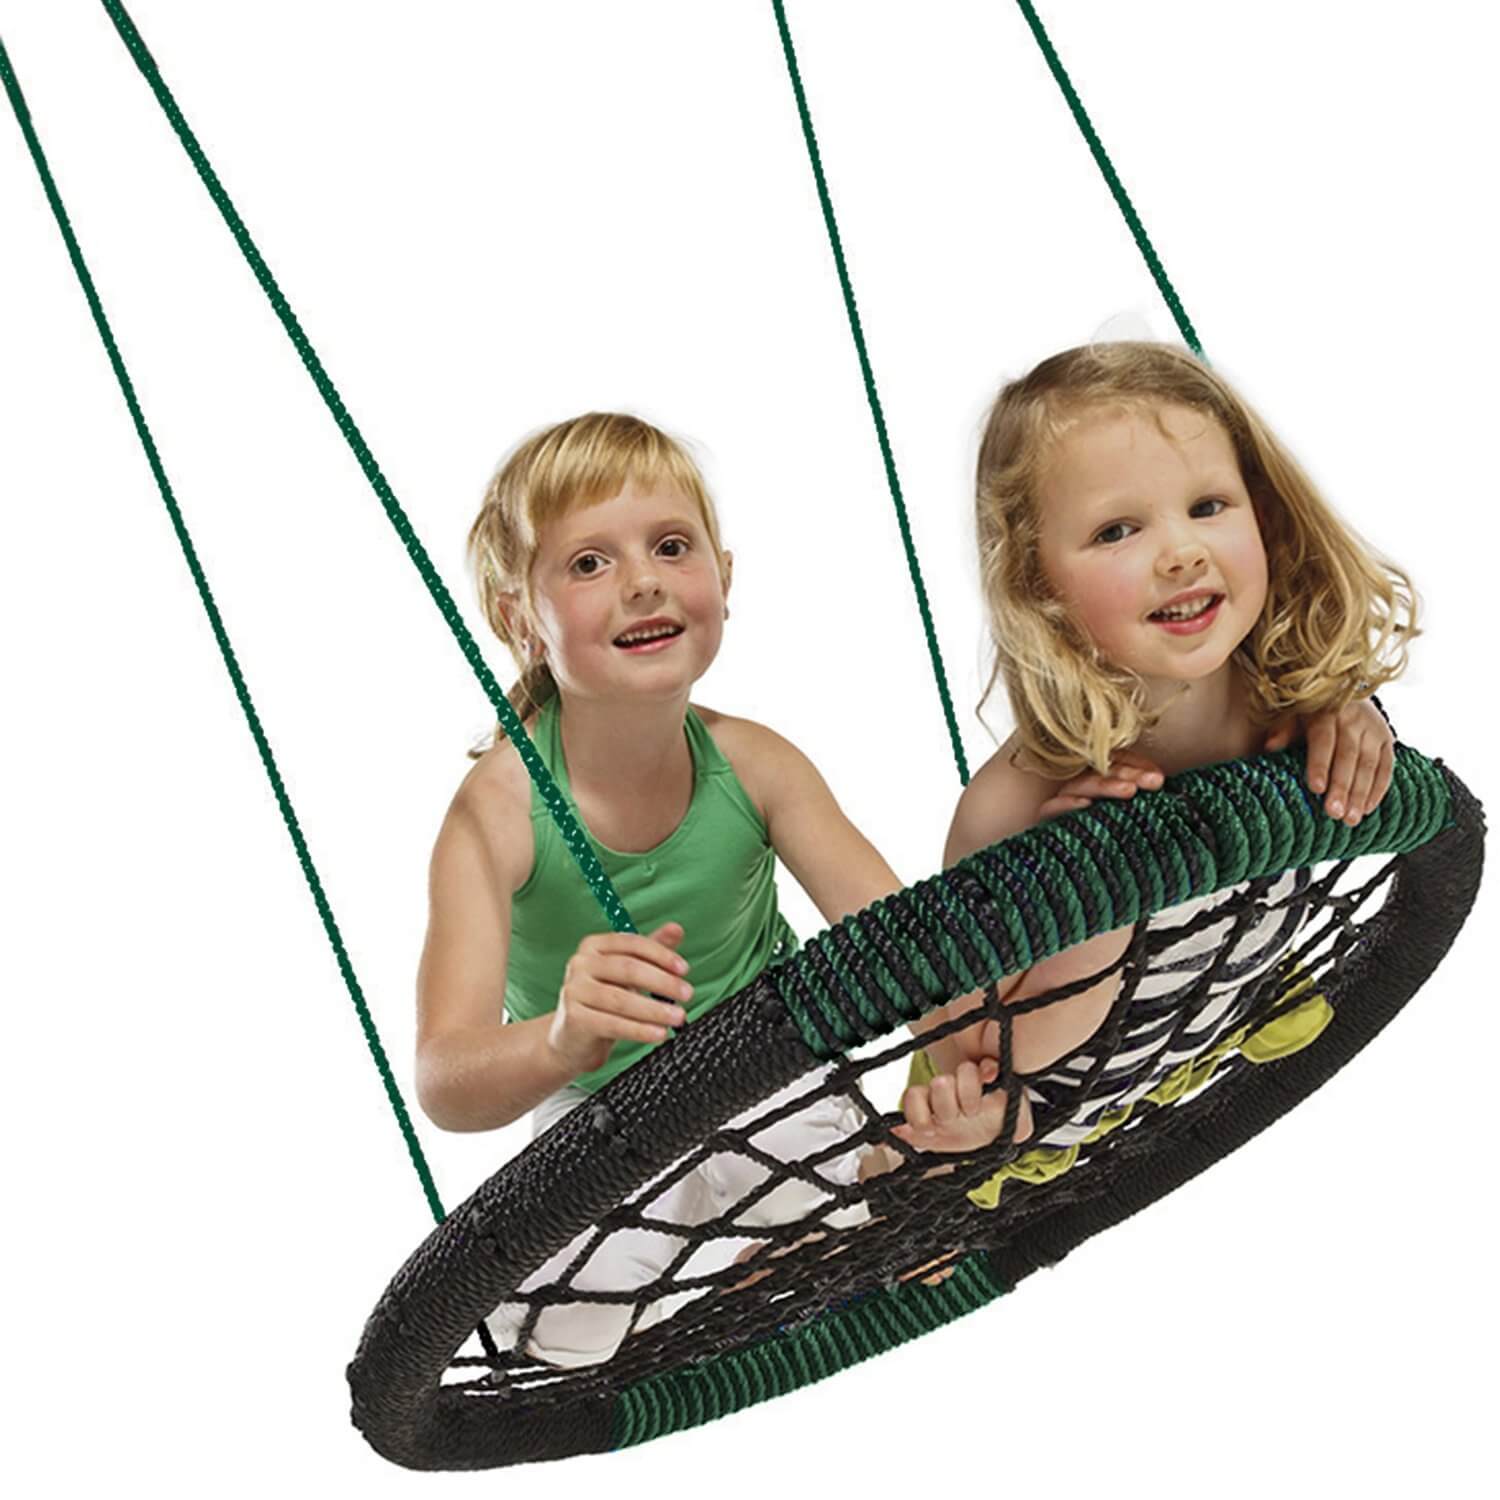 Cool outdoor swings for kids - Monster Web Swing by Swing-N-Slide | Summer Activities and boredom busters to stay active